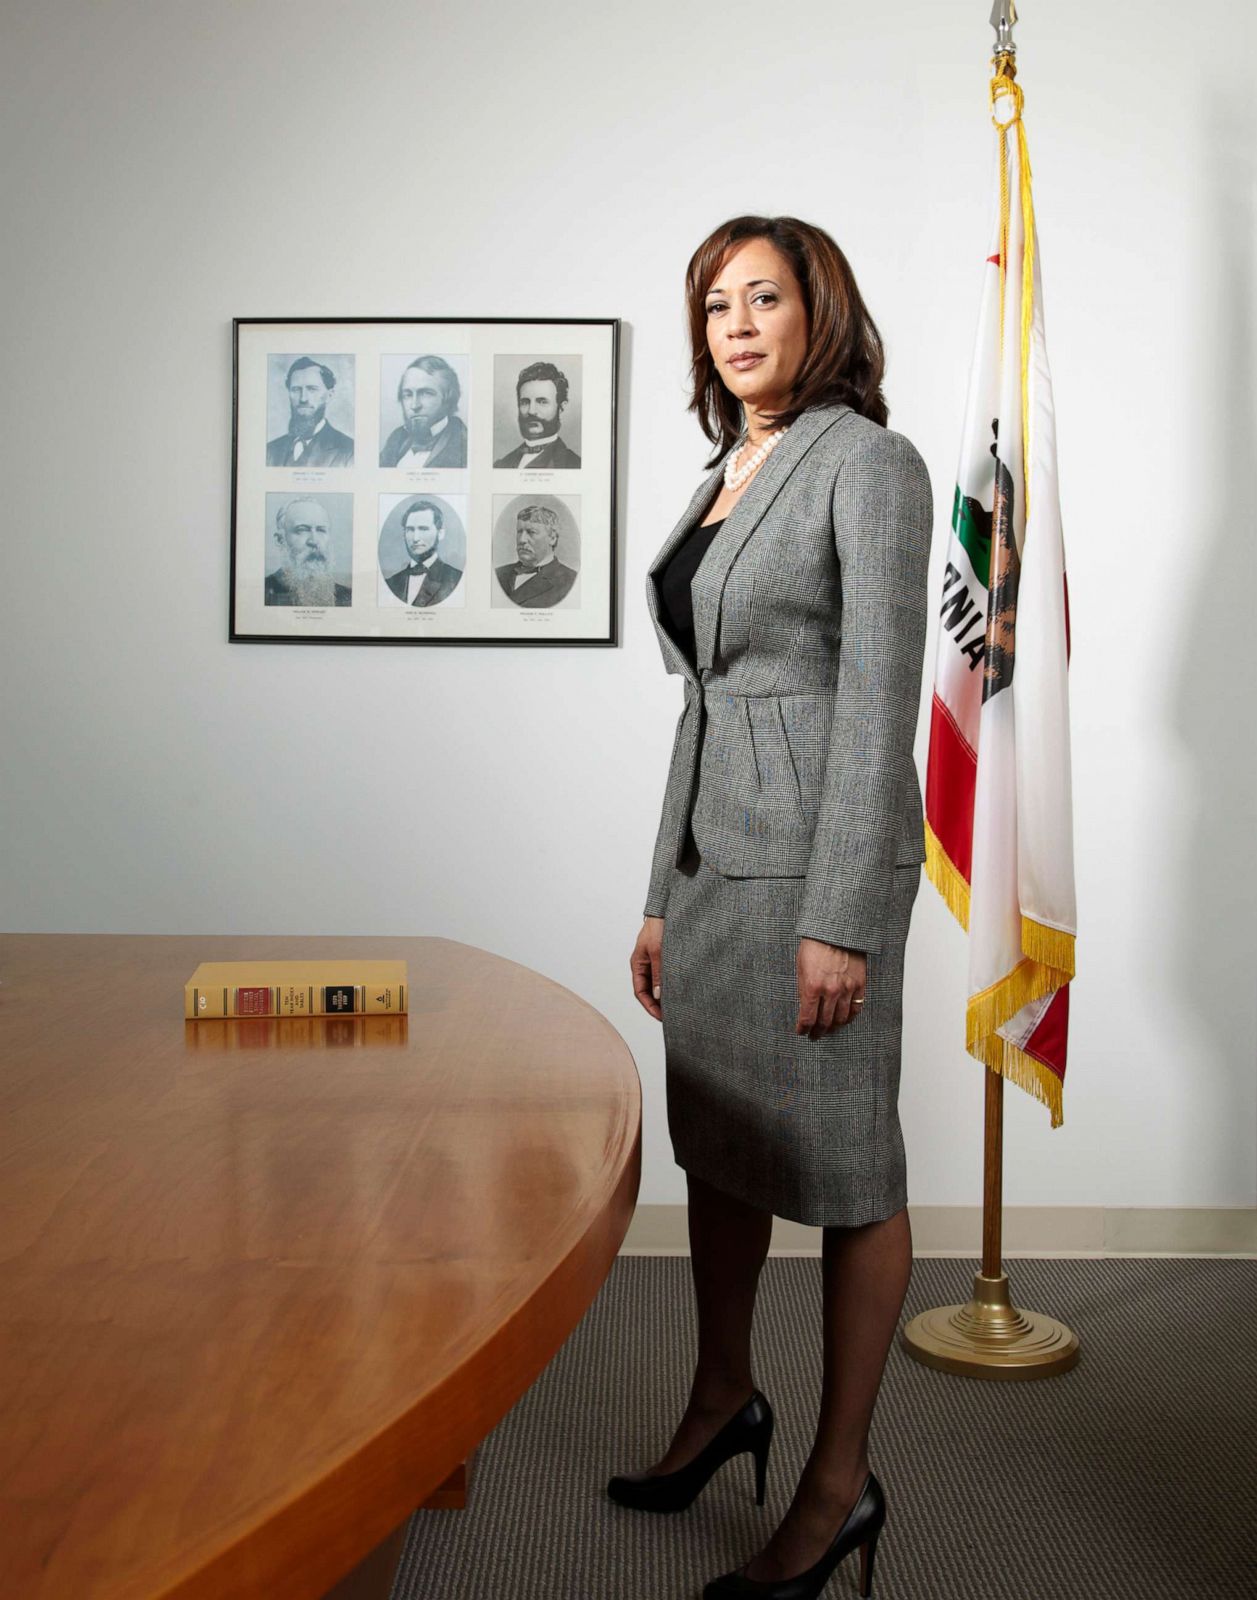 desmond horner recommends kamala harris nude pictures pic